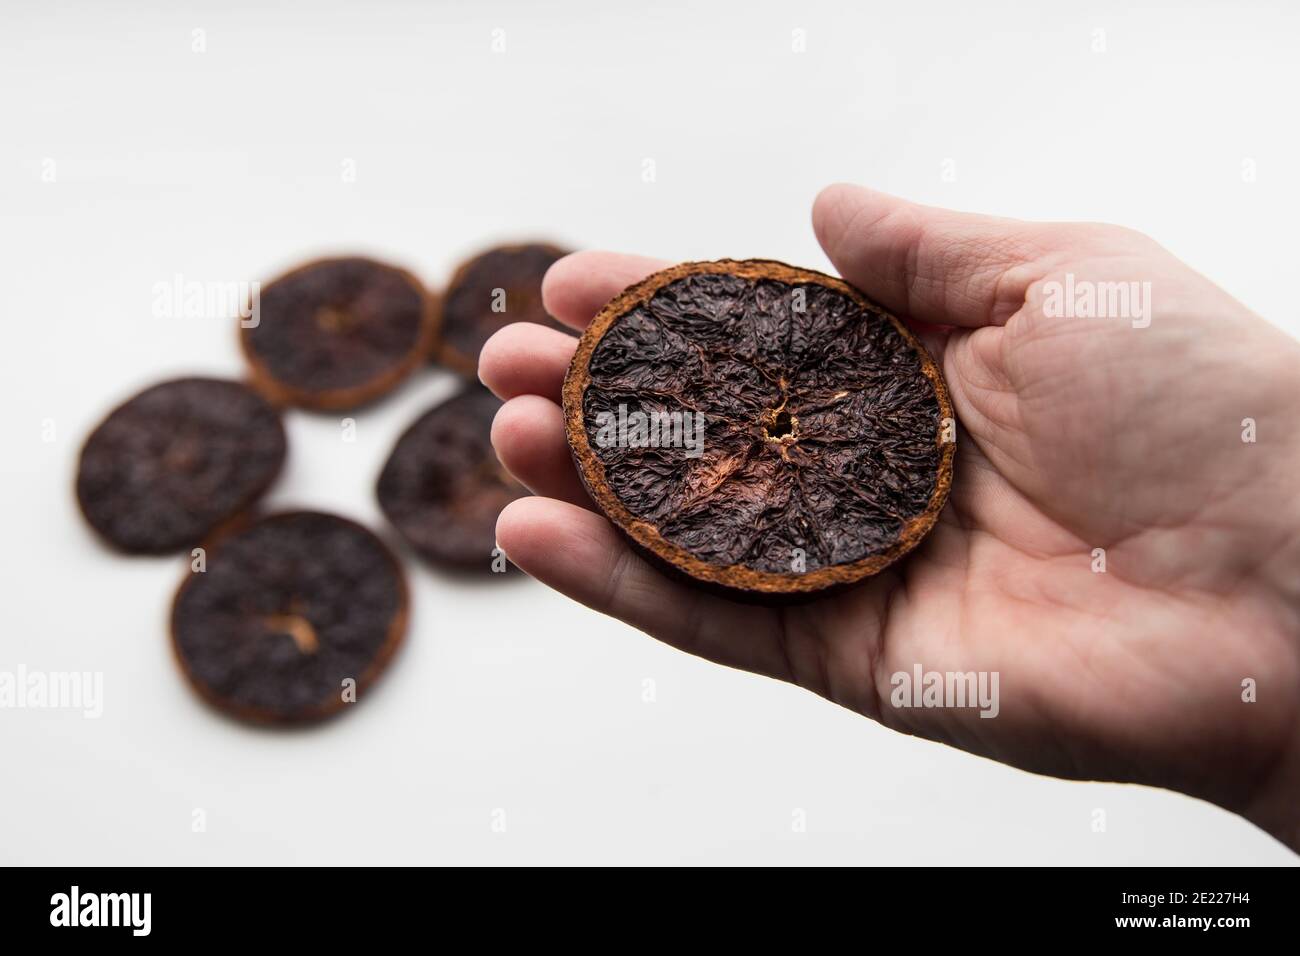 Failure at drying orange slices in oven. Person hand holding a dry and over burnt charred fruit. Stock Photo